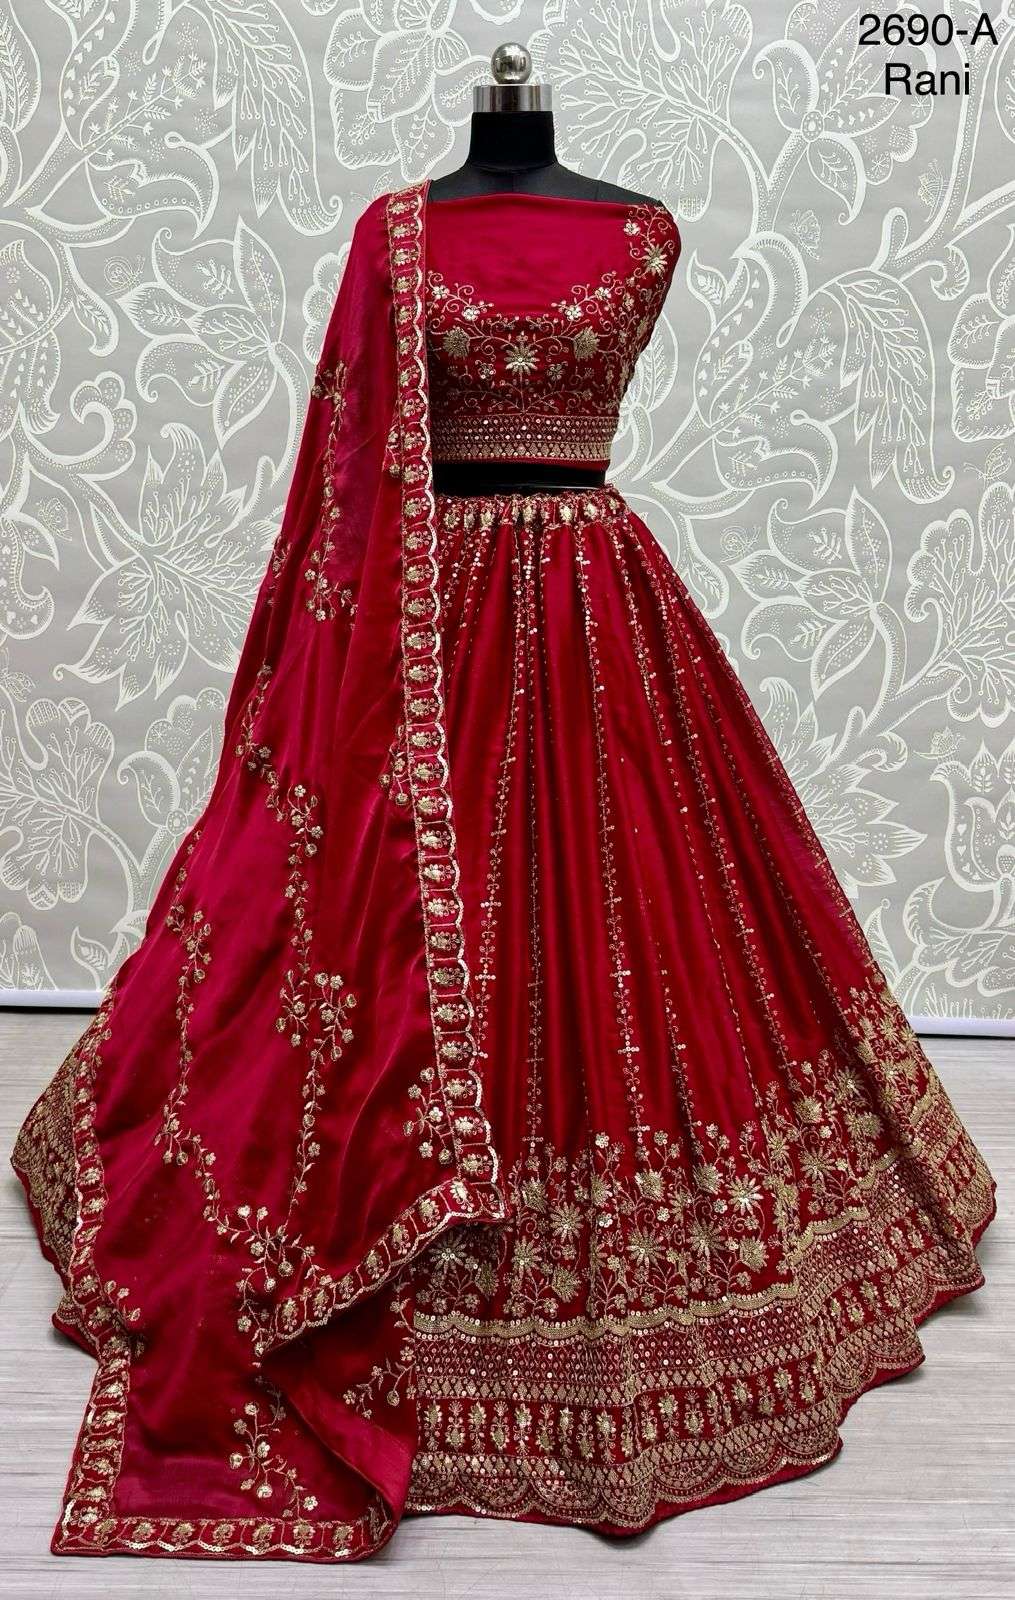 A-2690 COLOUR BY ASLIWHOLESALE DESIGNER SATIN CHIFFON EMBROIDERY LEHENGAS